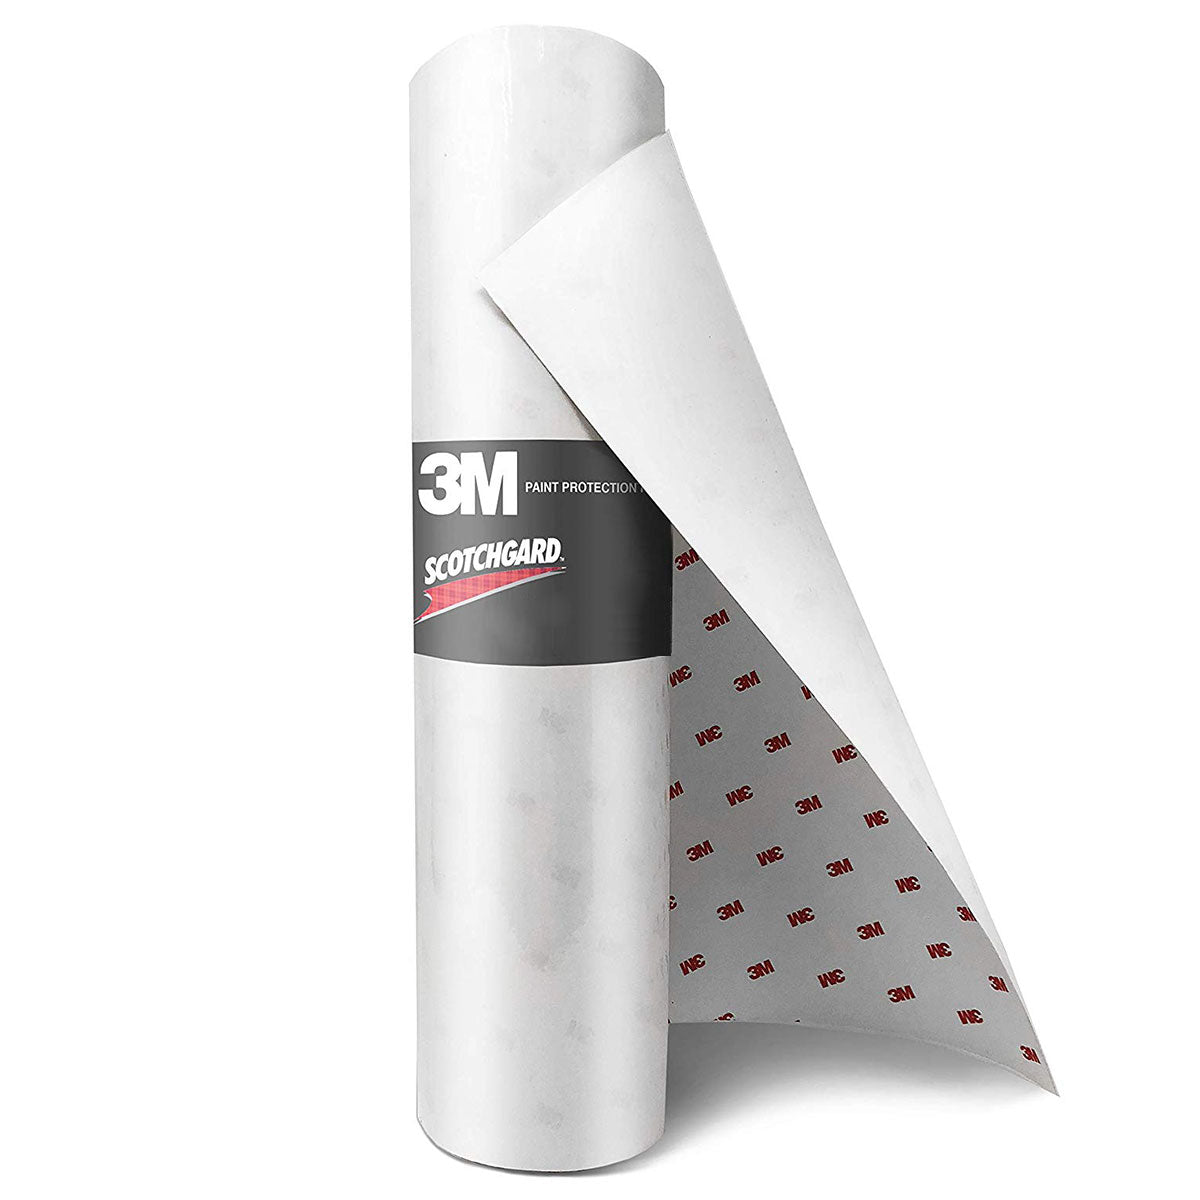 3M Paint Protection Film Roll 70mm wide x 1.000mtr